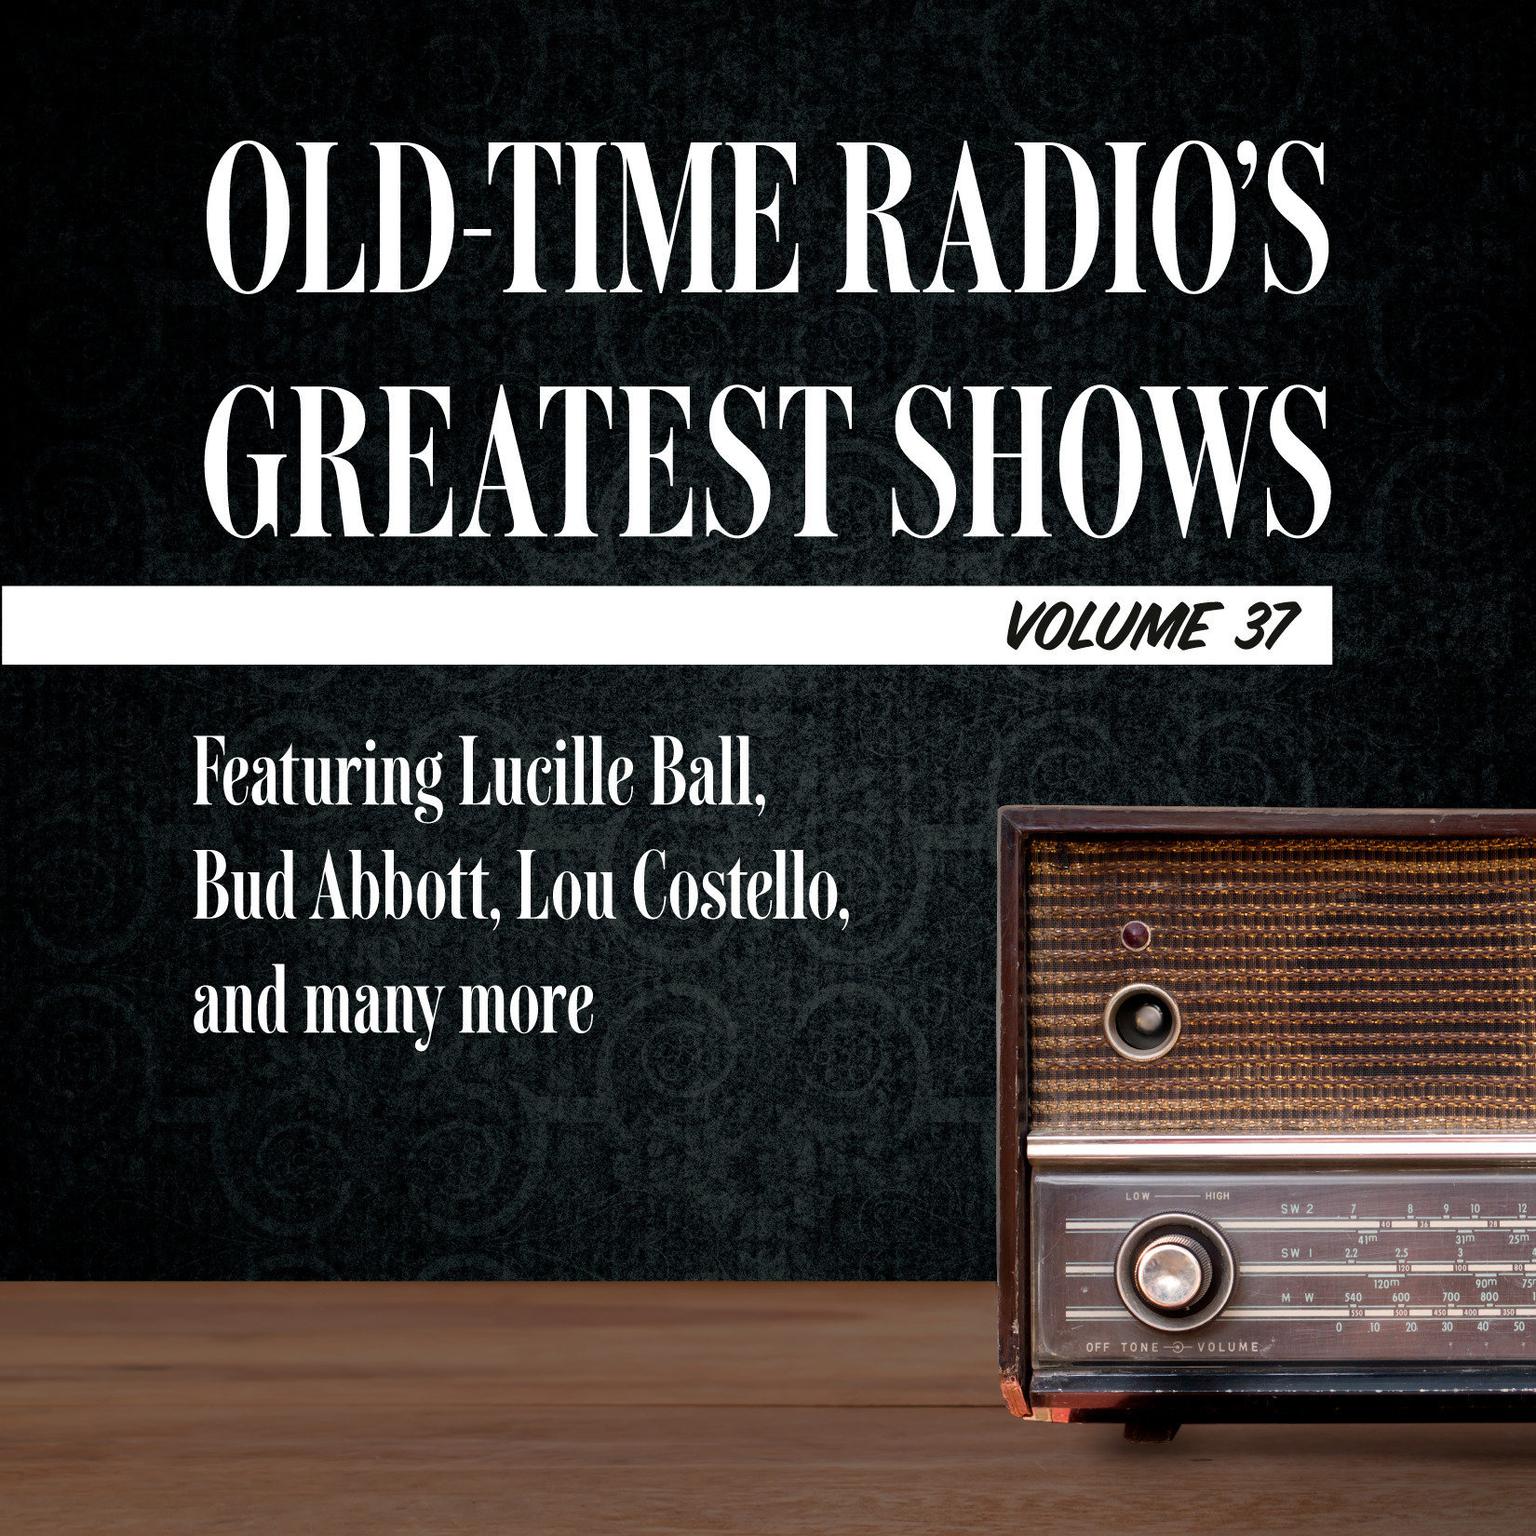 Old-Time Radios Greatest Shows, Volume 37: Featuring Lucille Ball, Bud Abbott, Lou Costello, and many more Audiobook, by Carl Amari